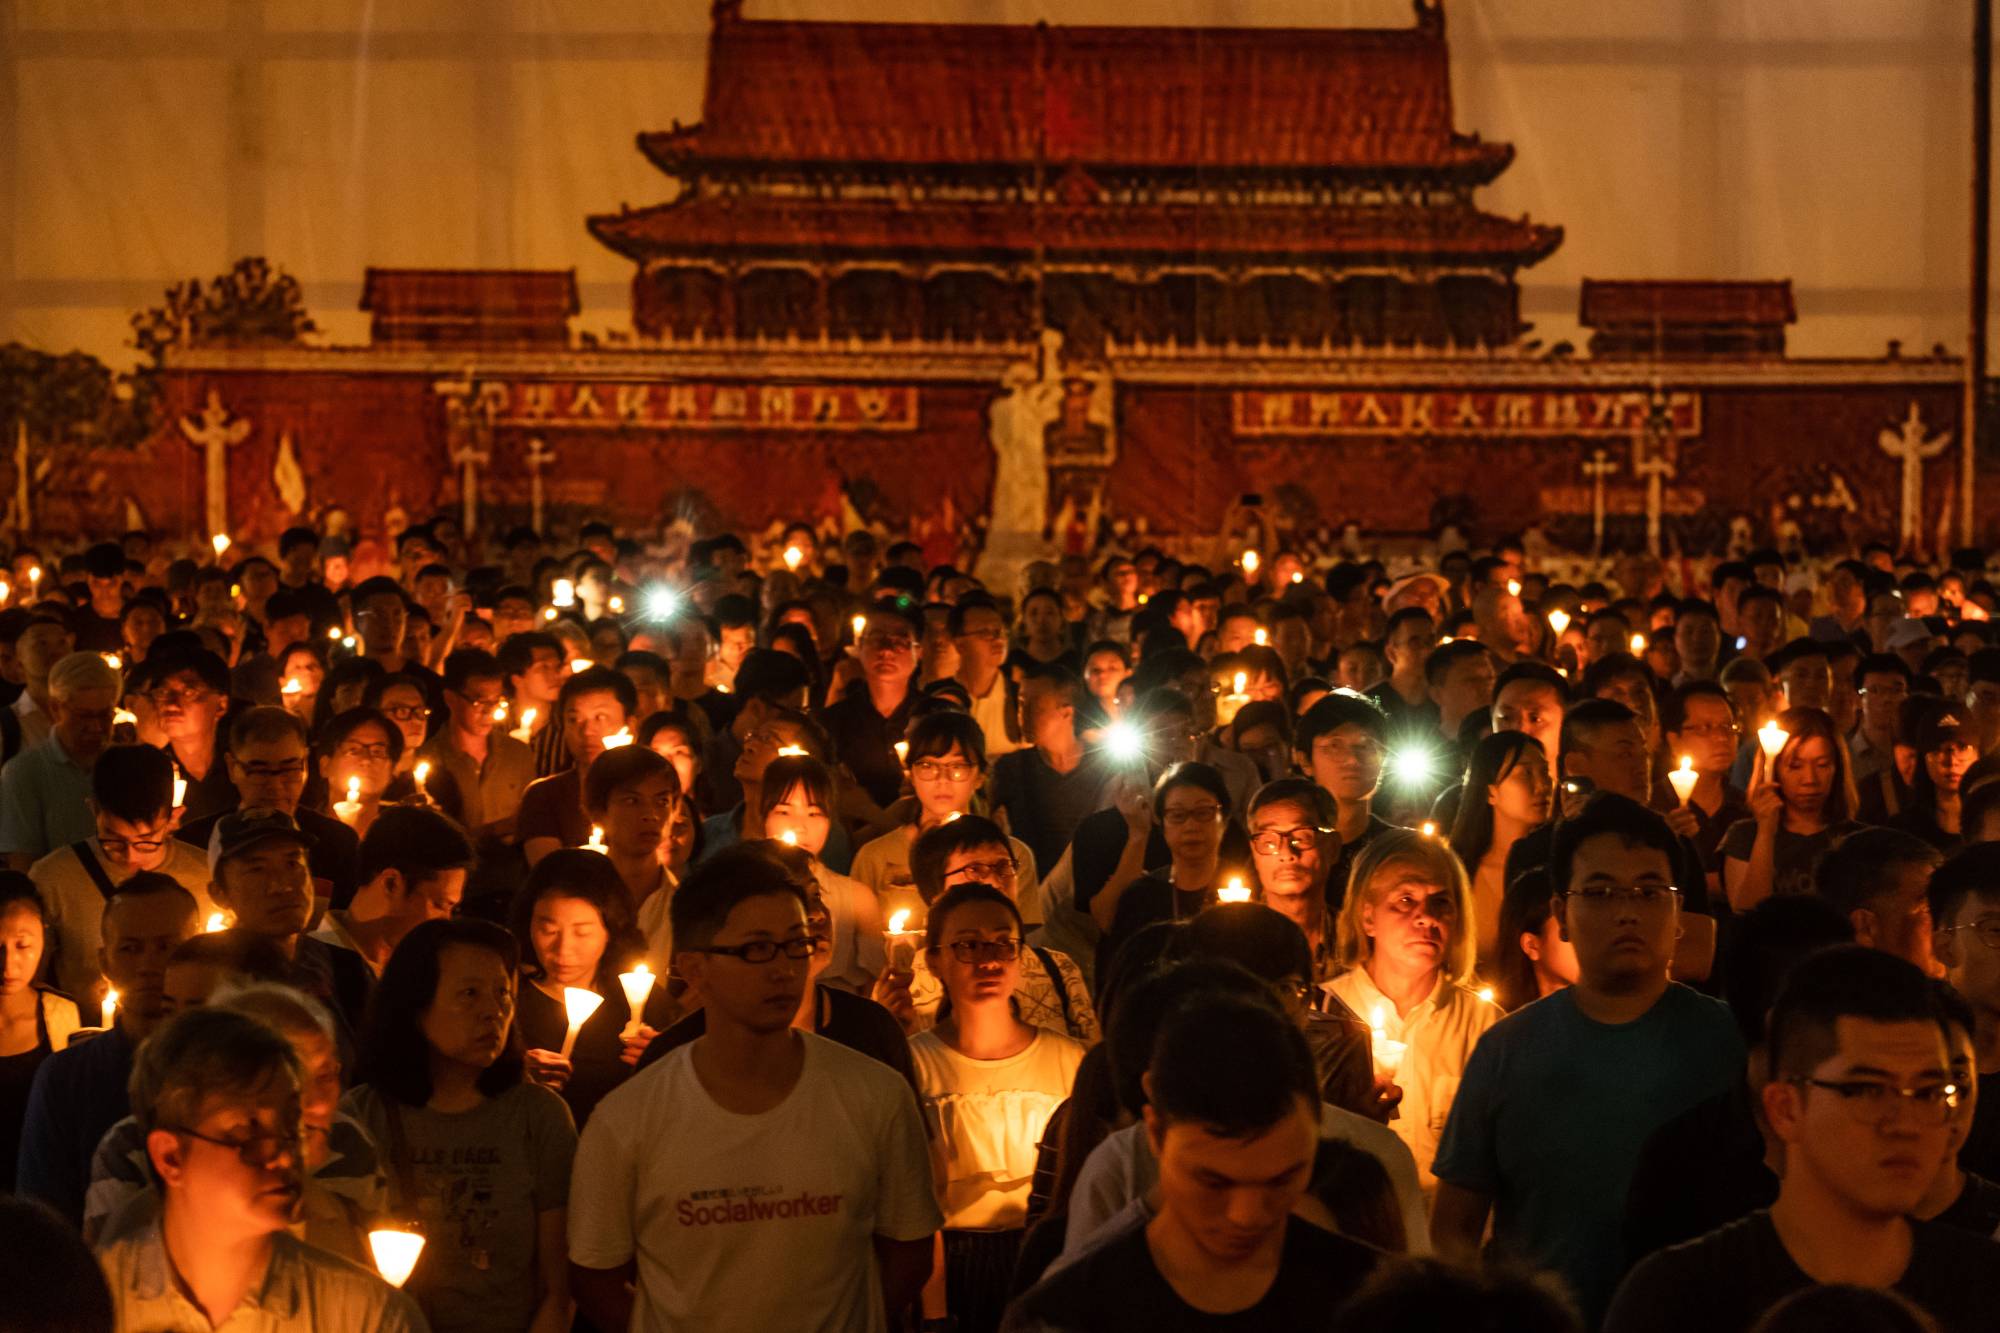 People take part in a candlelight vigil at Victoria Park in Hong Kong on June 4, 2019 to commemorate the protesters killed in Tiananmen Square 30 years before. | LAM YIK FEI / THE NEW YORK TIMES